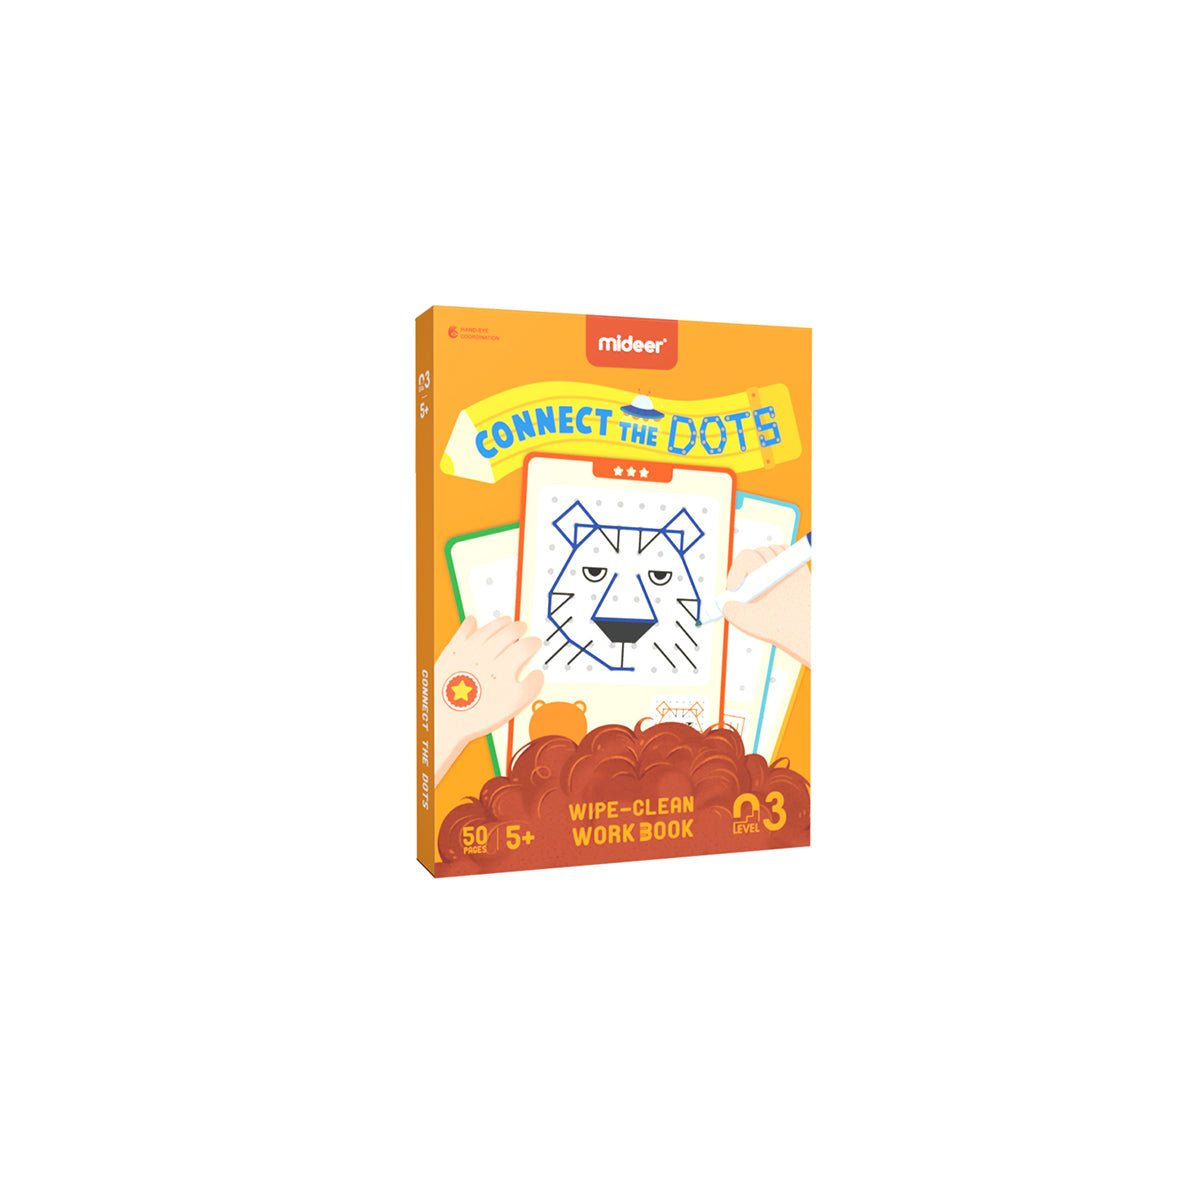 Connect The Dots Wipe-clean Work Book - 0cm